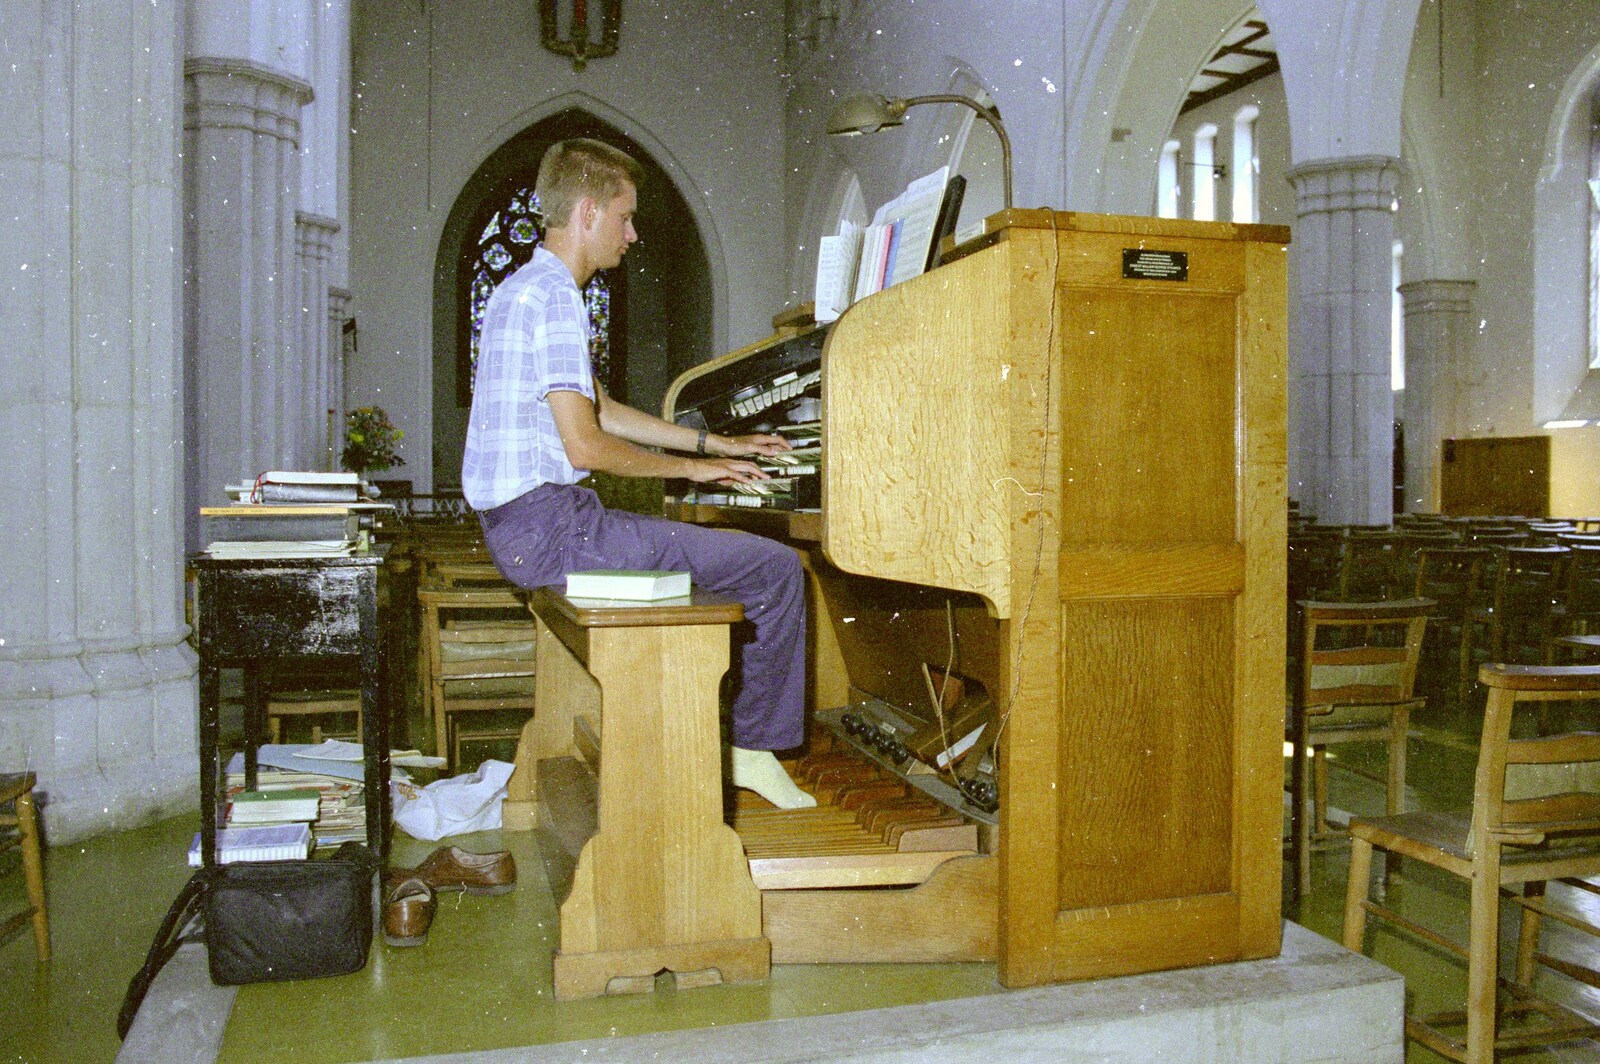 Uni: Country Clubs, On The Beach and Organs, Plymouth - 28th May 1989: More organg action and socked feet